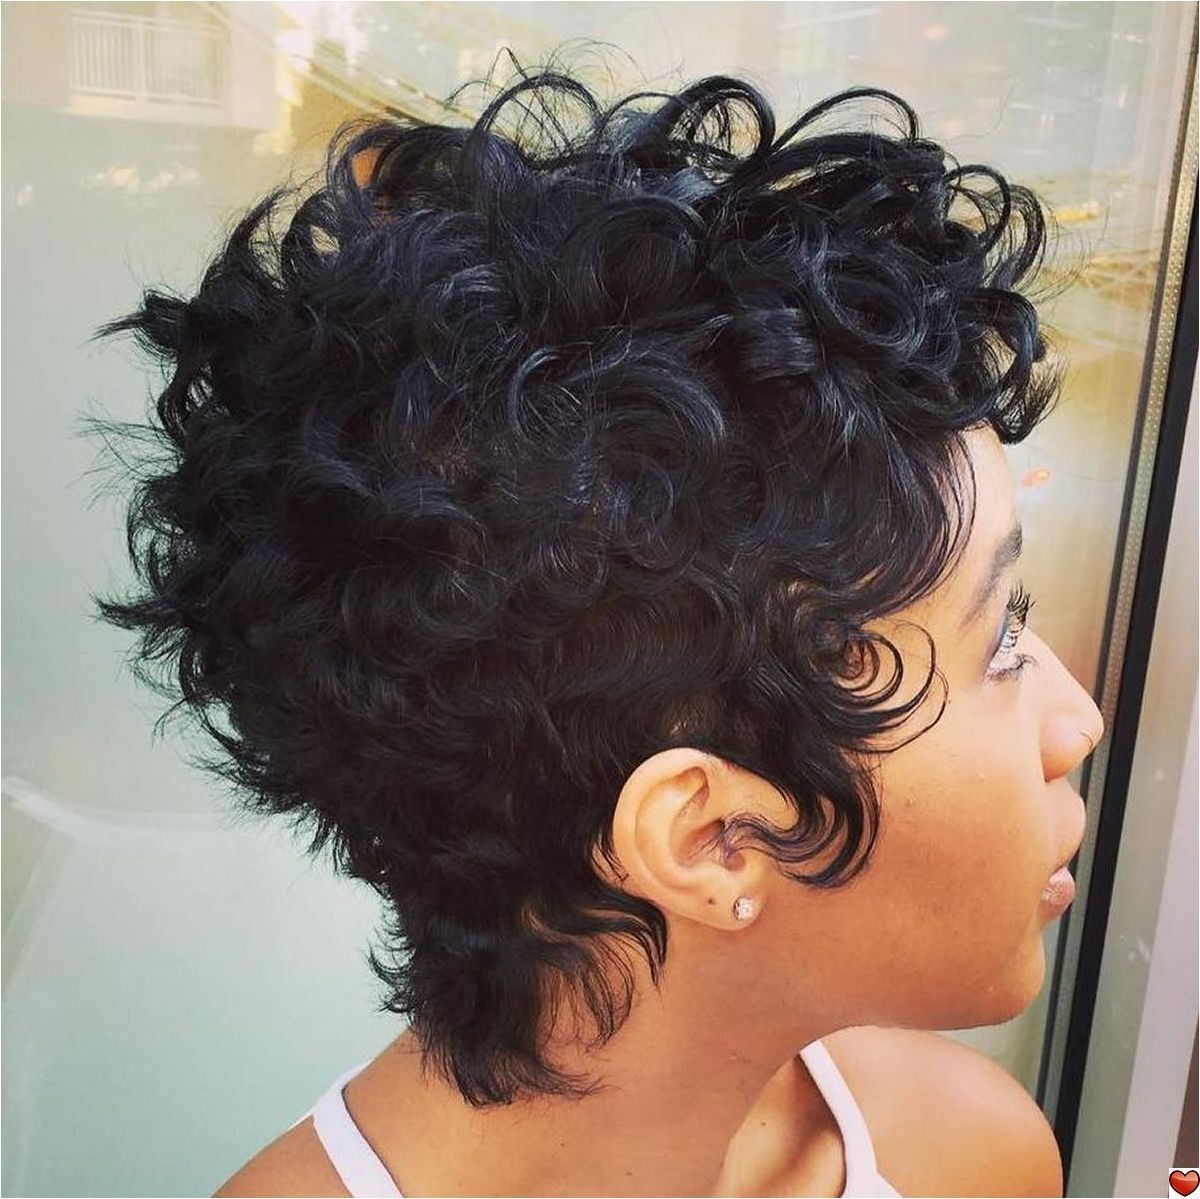 Black Curly Pixie Haircut 20 Cool Curly Hairstyles That Are Easy To With Regard To Favorite Short Black Pixie Hairstyles For Curly Hair (Gallery 9 of 20)